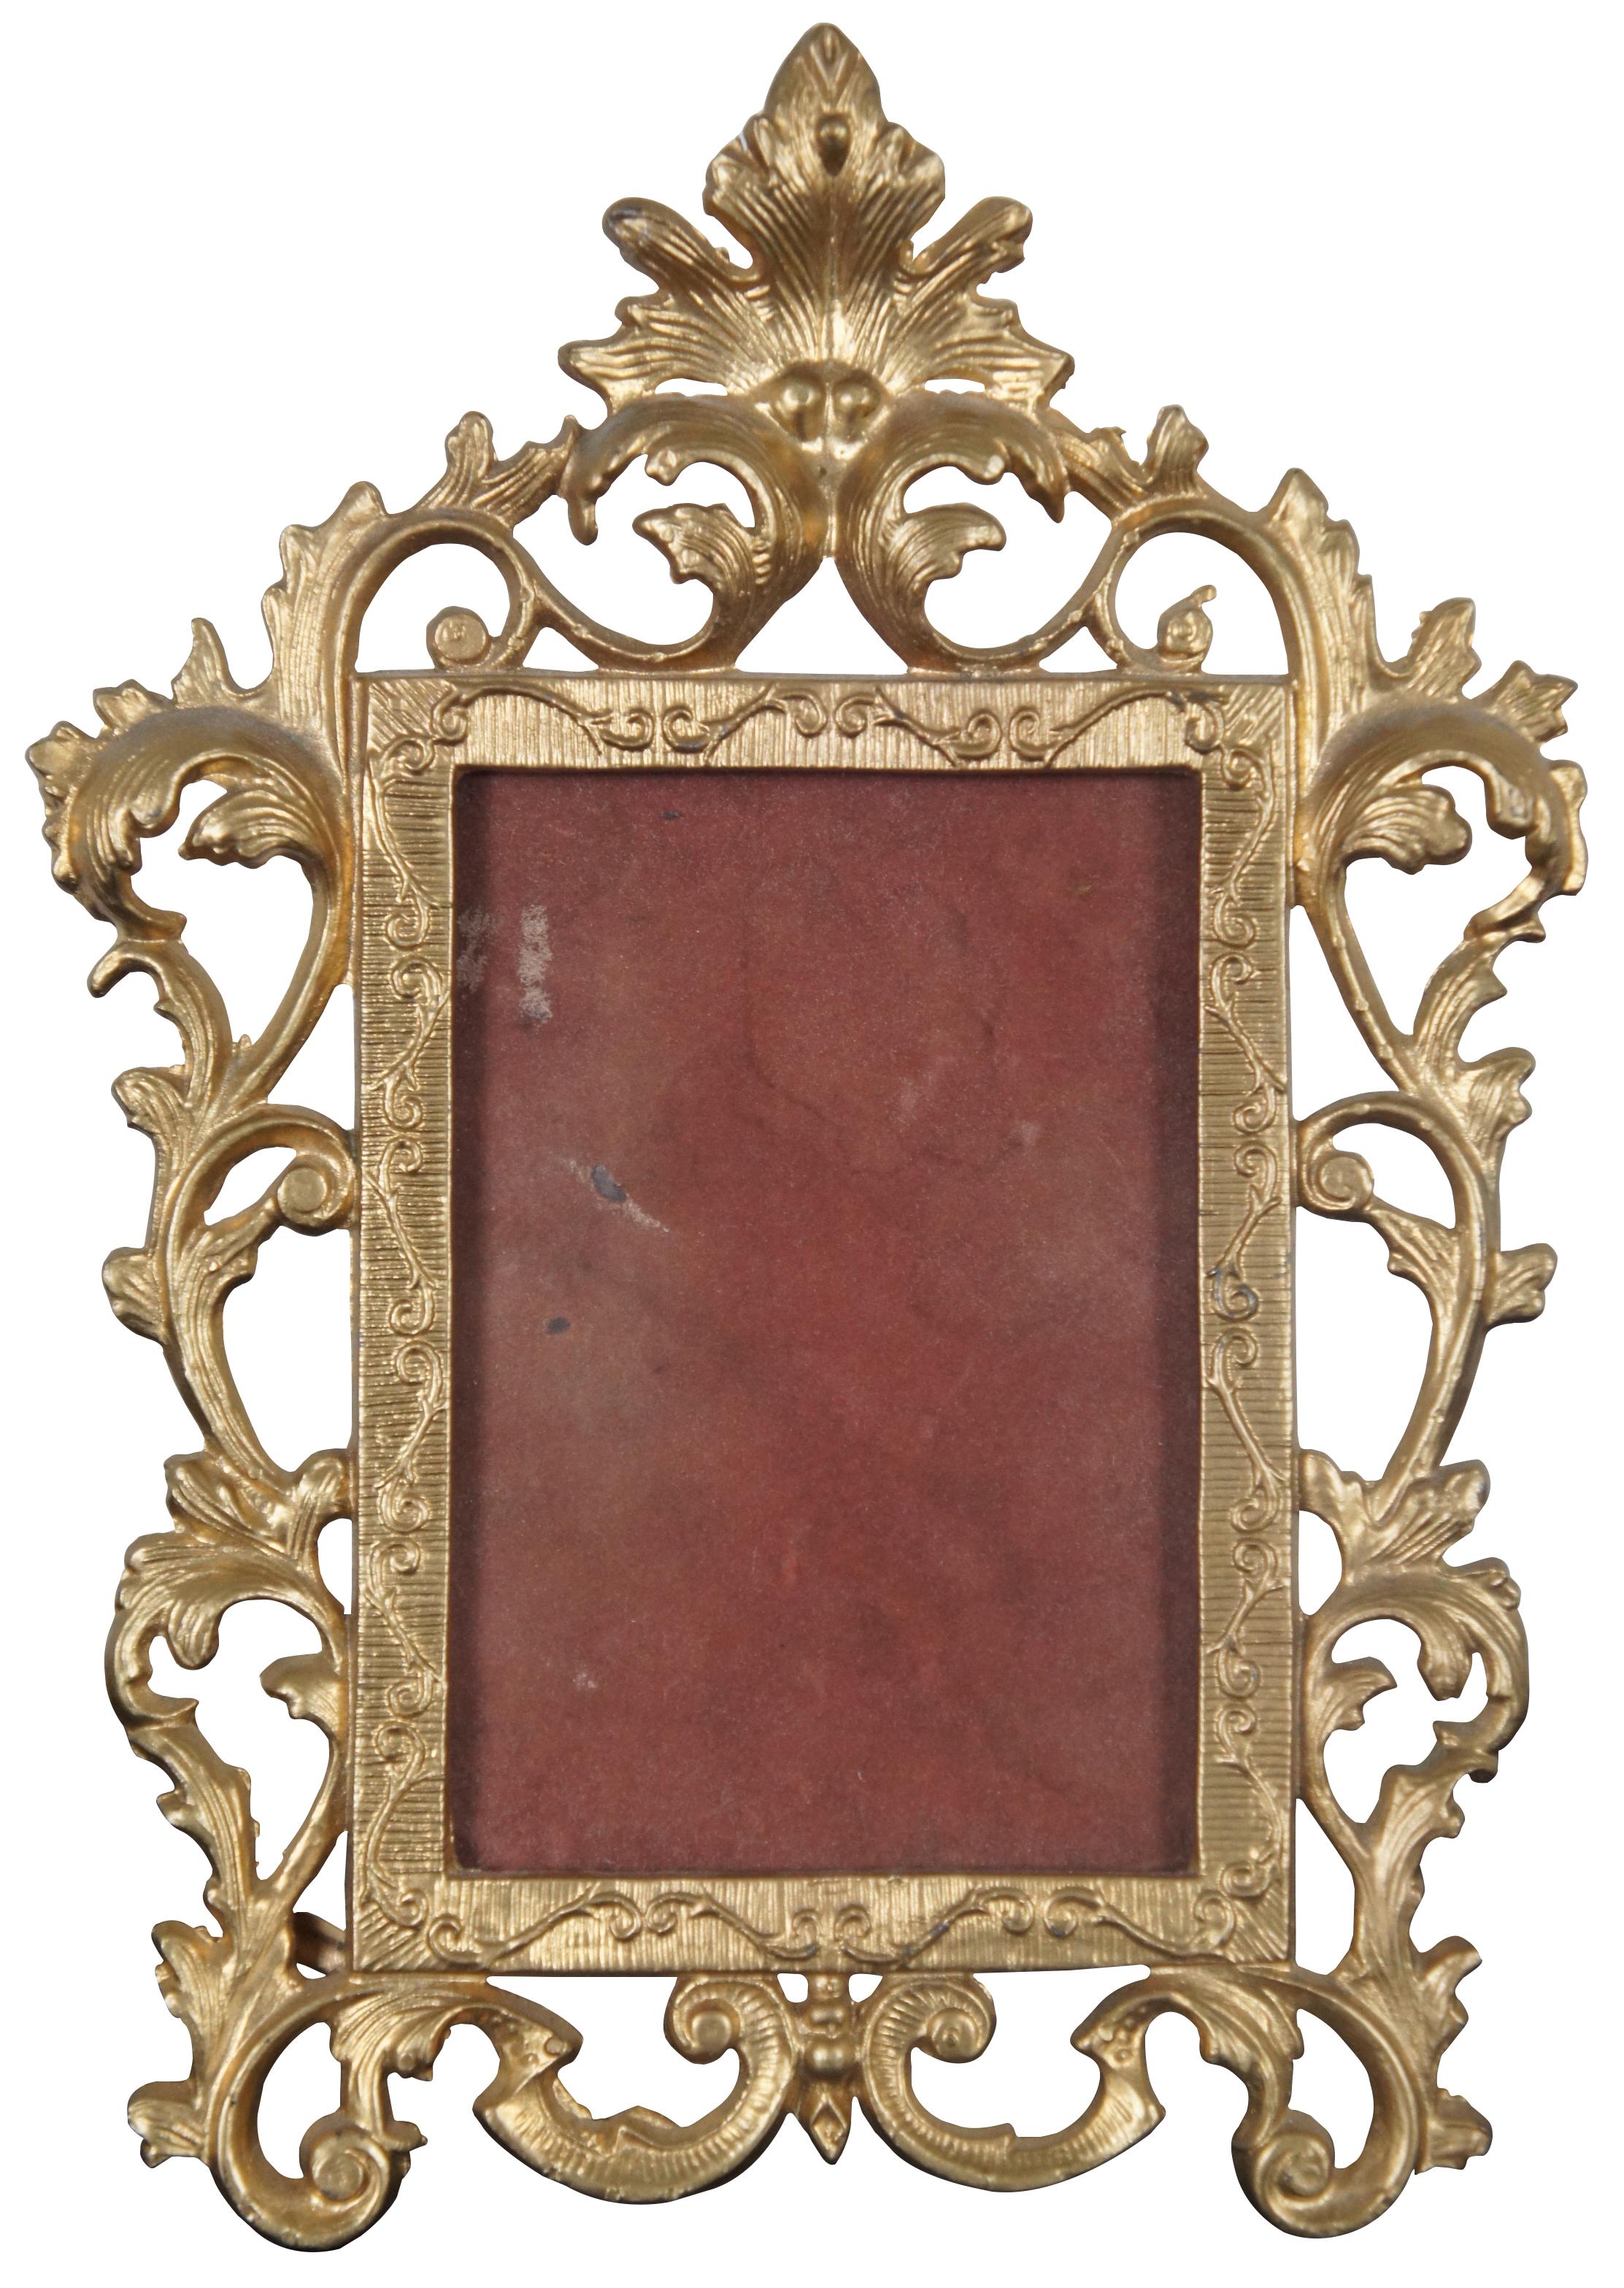 Antique Baroque Cast Iron Gilt Tabletop Picture Mirror Frame French European 4